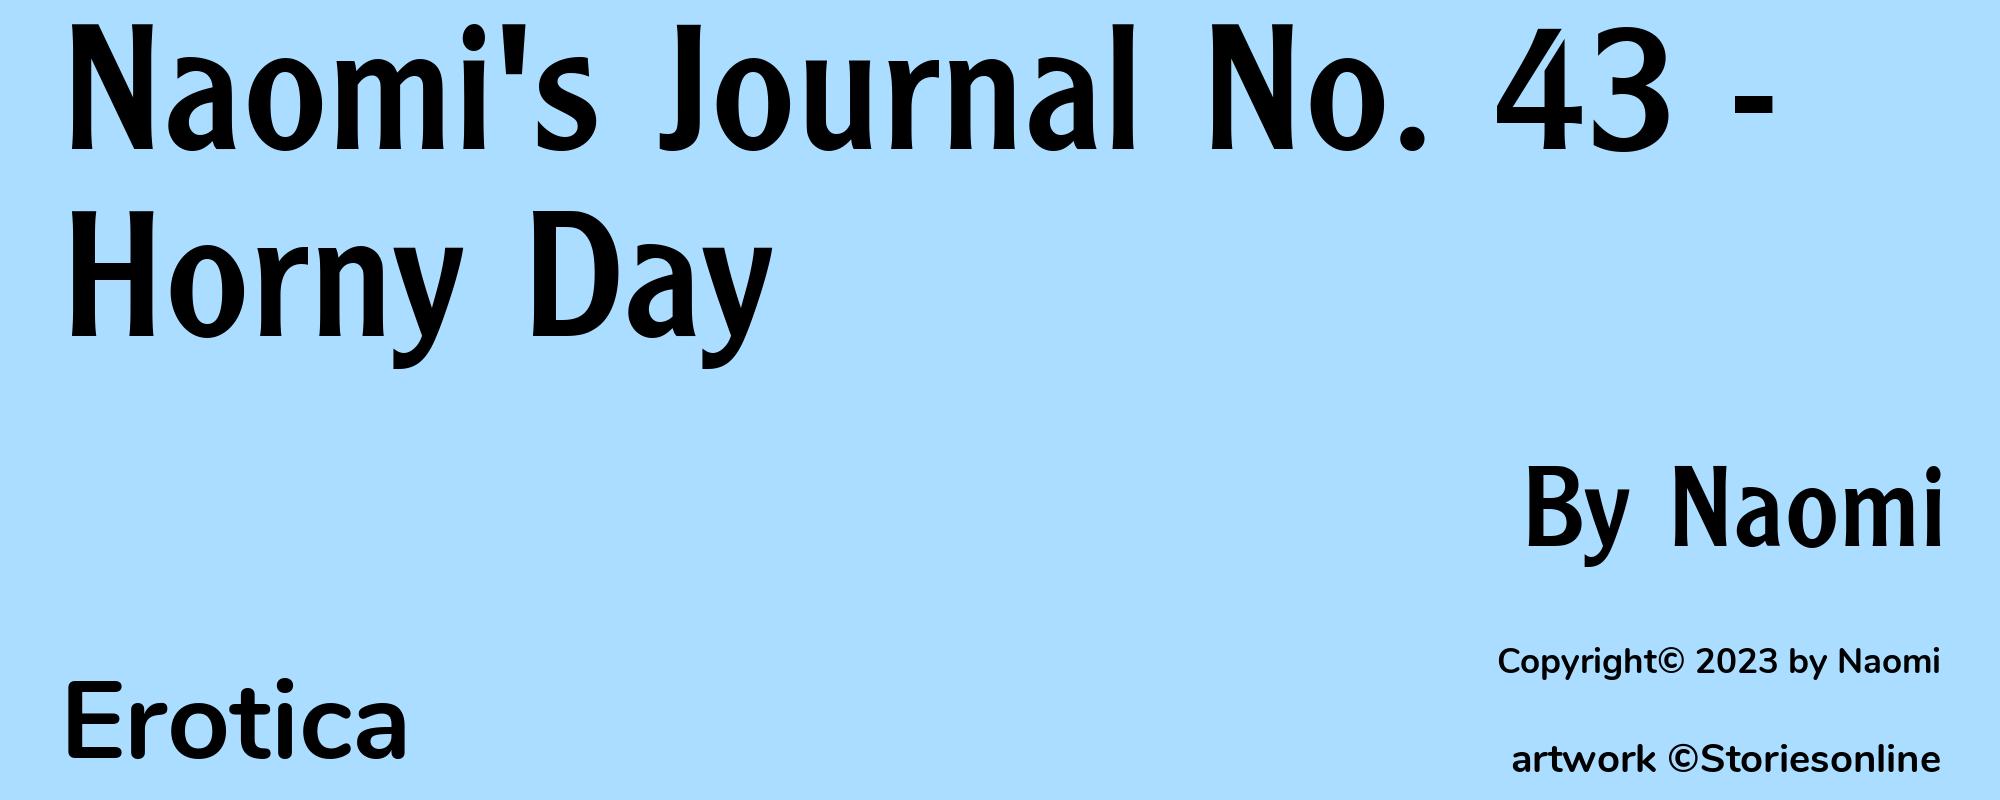 Naomi's Journal No. 43 - Horny Day - Cover